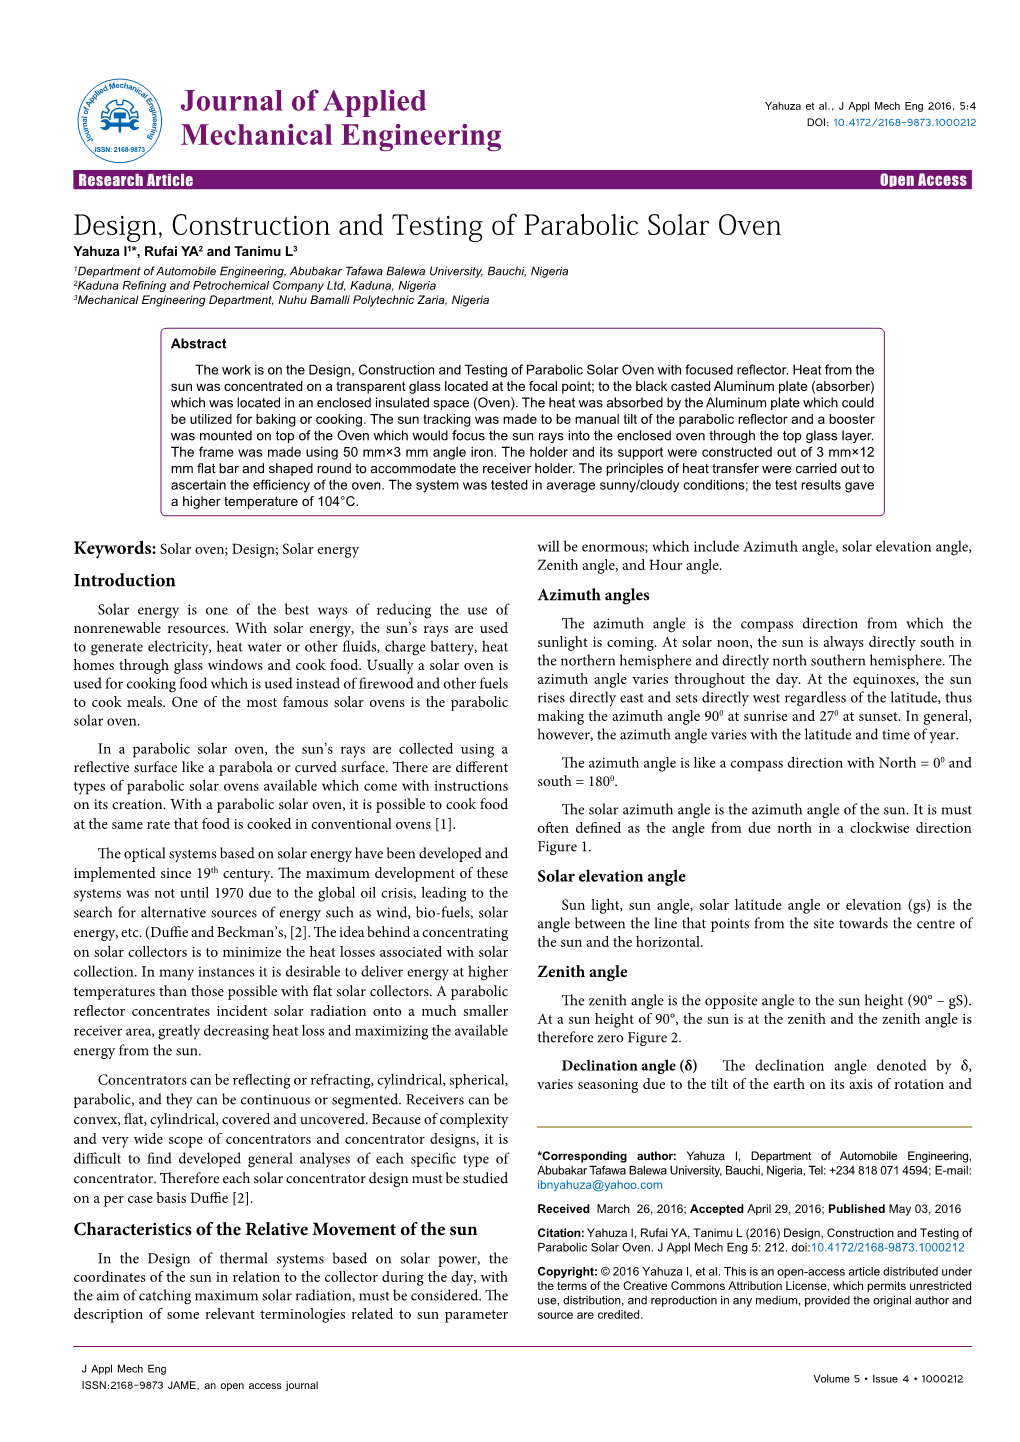 Design, Construction and Testing of Parabolic Solar Oven